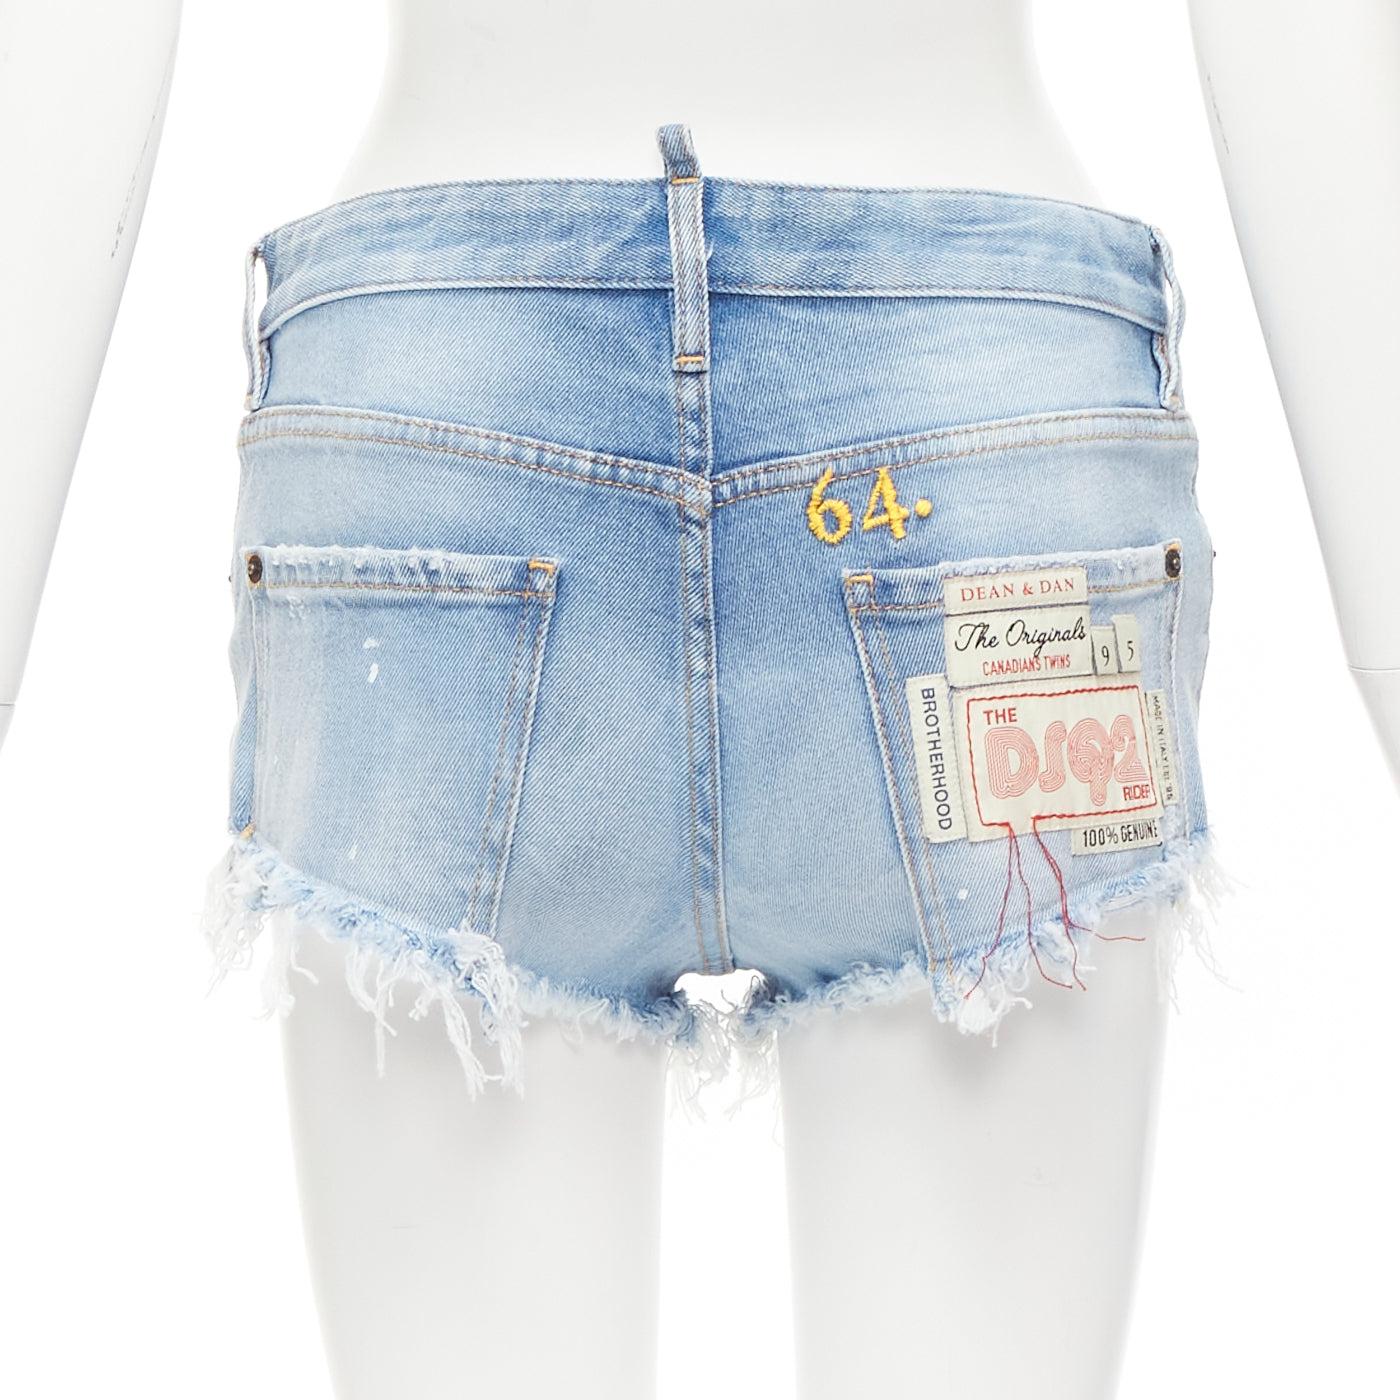 DSQUARED blue washed distressed logo patch frayed cut off booty shorts IT38 XS
Reference: AAWC/A00975
Brand: Dsquared2
Material: Denim
Color: Blue, Multicolour
Pattern: Solid
Closure: Button Fly
Extra Details: DSQ2 patches at back right pocket.
Made